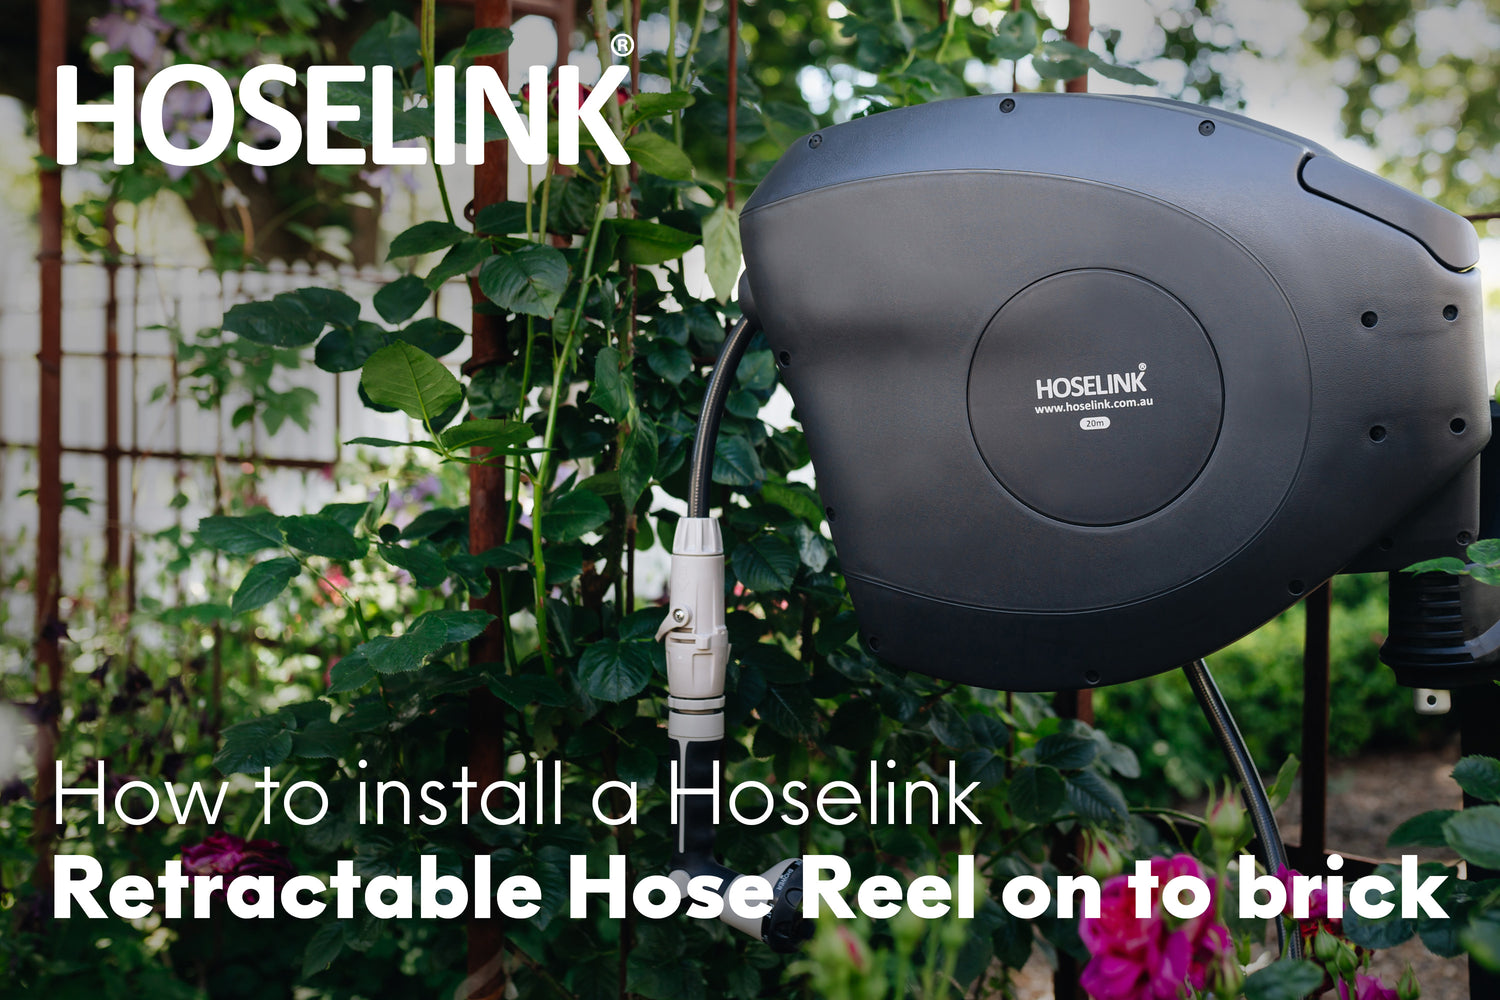 How to install a Hoselink Retractable Hose Reel on to brick